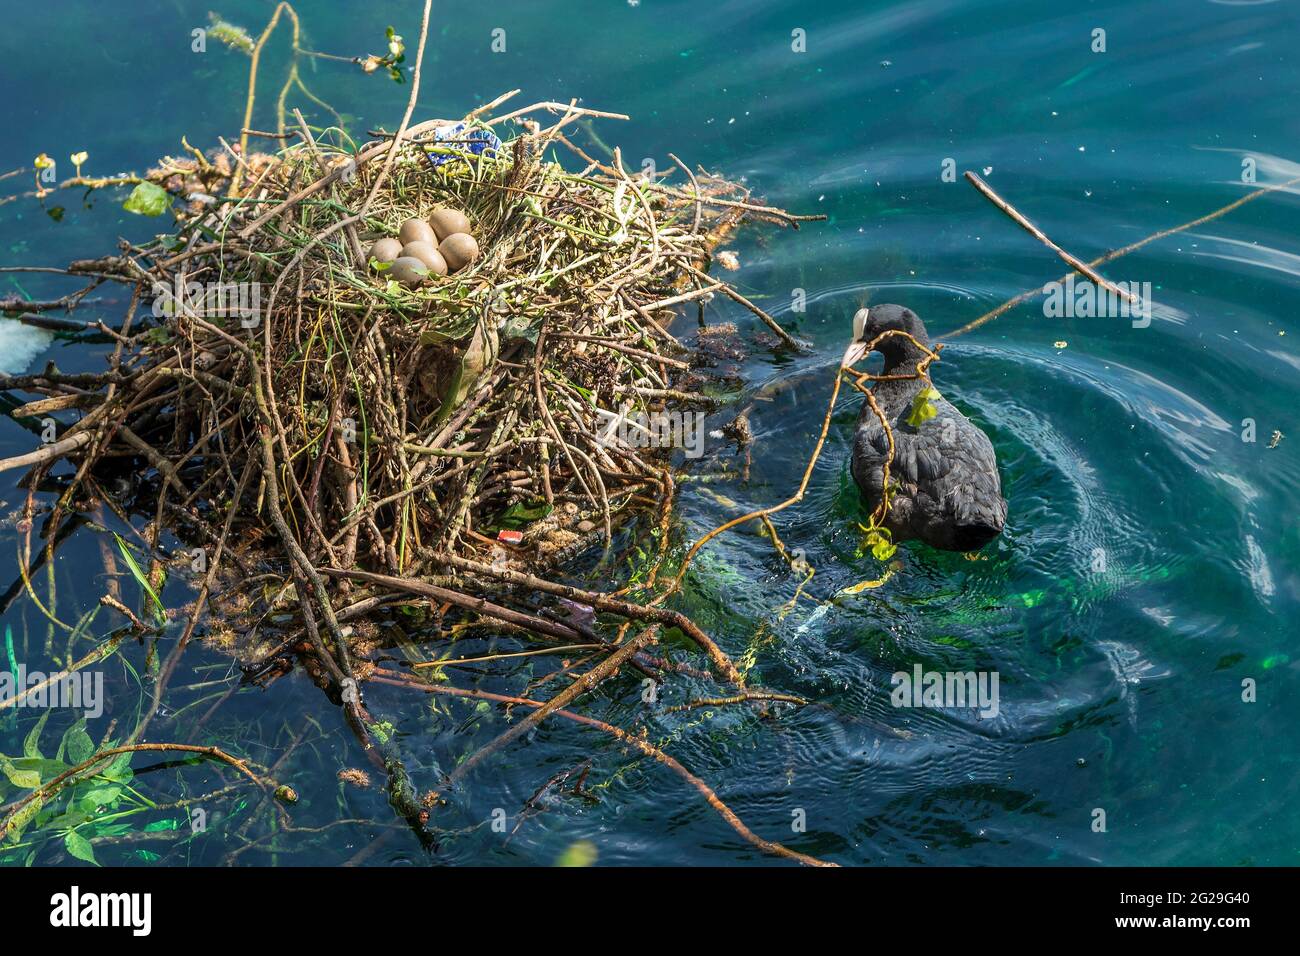 Nesting Coot with a clutch of eggs on the nest. Stock Photo